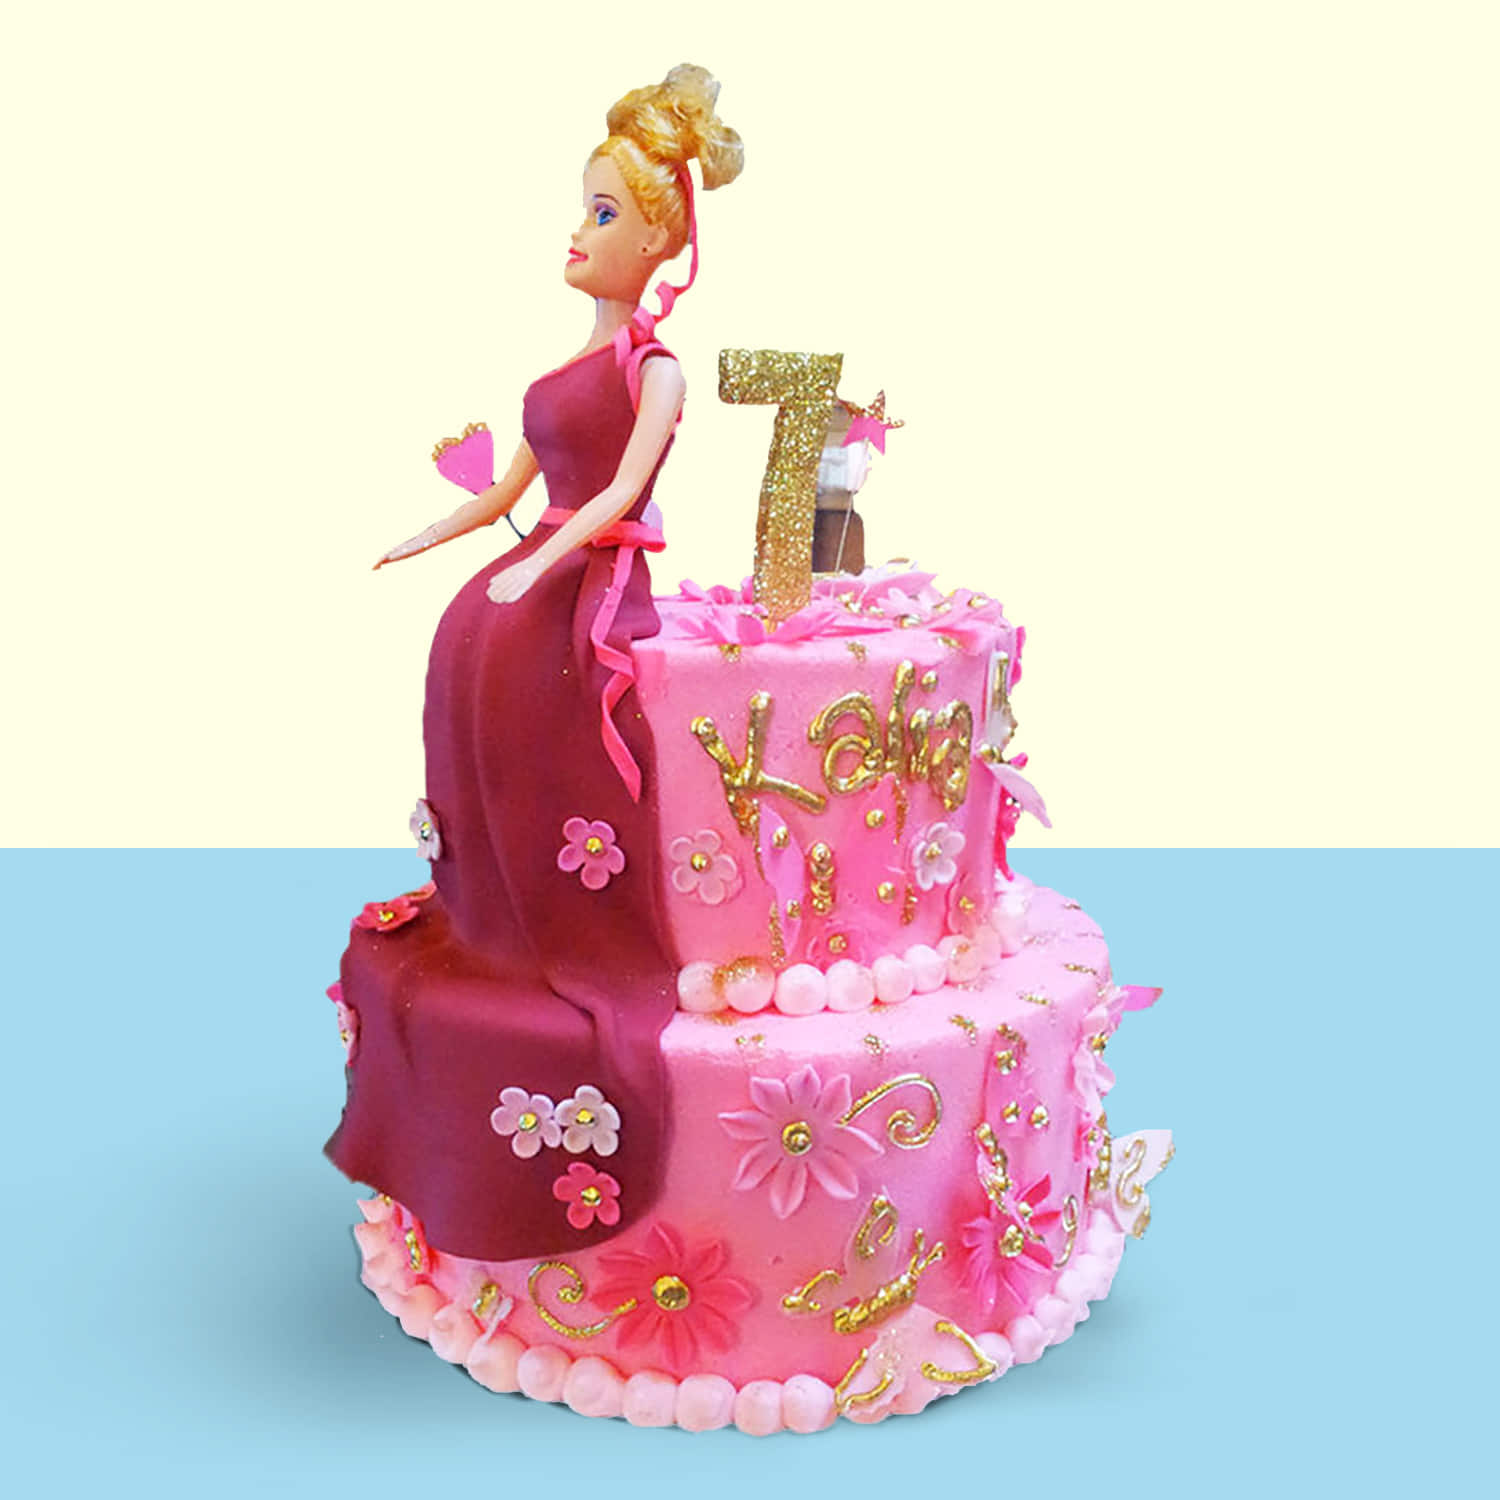 Extensive Collection of Doll Cake Images: Top 999+ Stunning Doll Cake  Images in Full 4K Quality